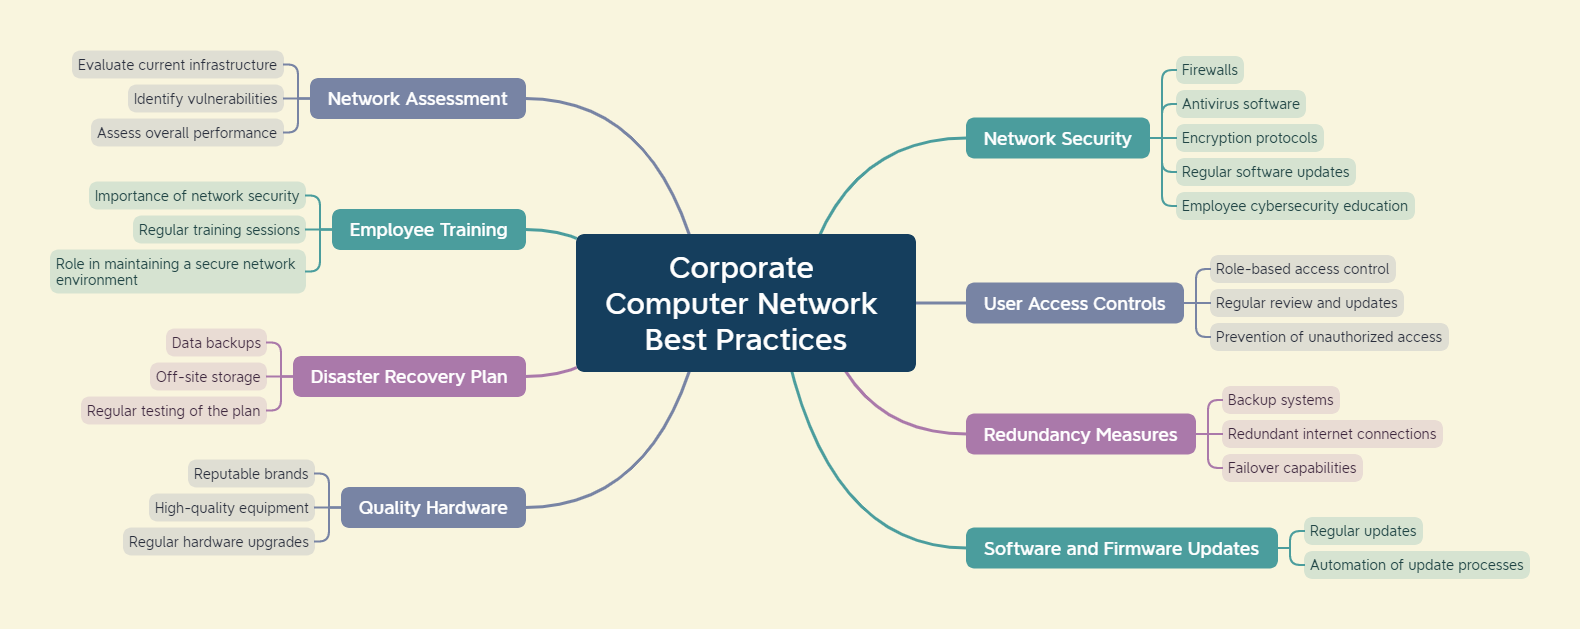 Mind map illustrating best practices for corporate computer networks: network assessment, security, user access controls, redundancy measures, software updates, quality hardware, disaster recovery, and employee training